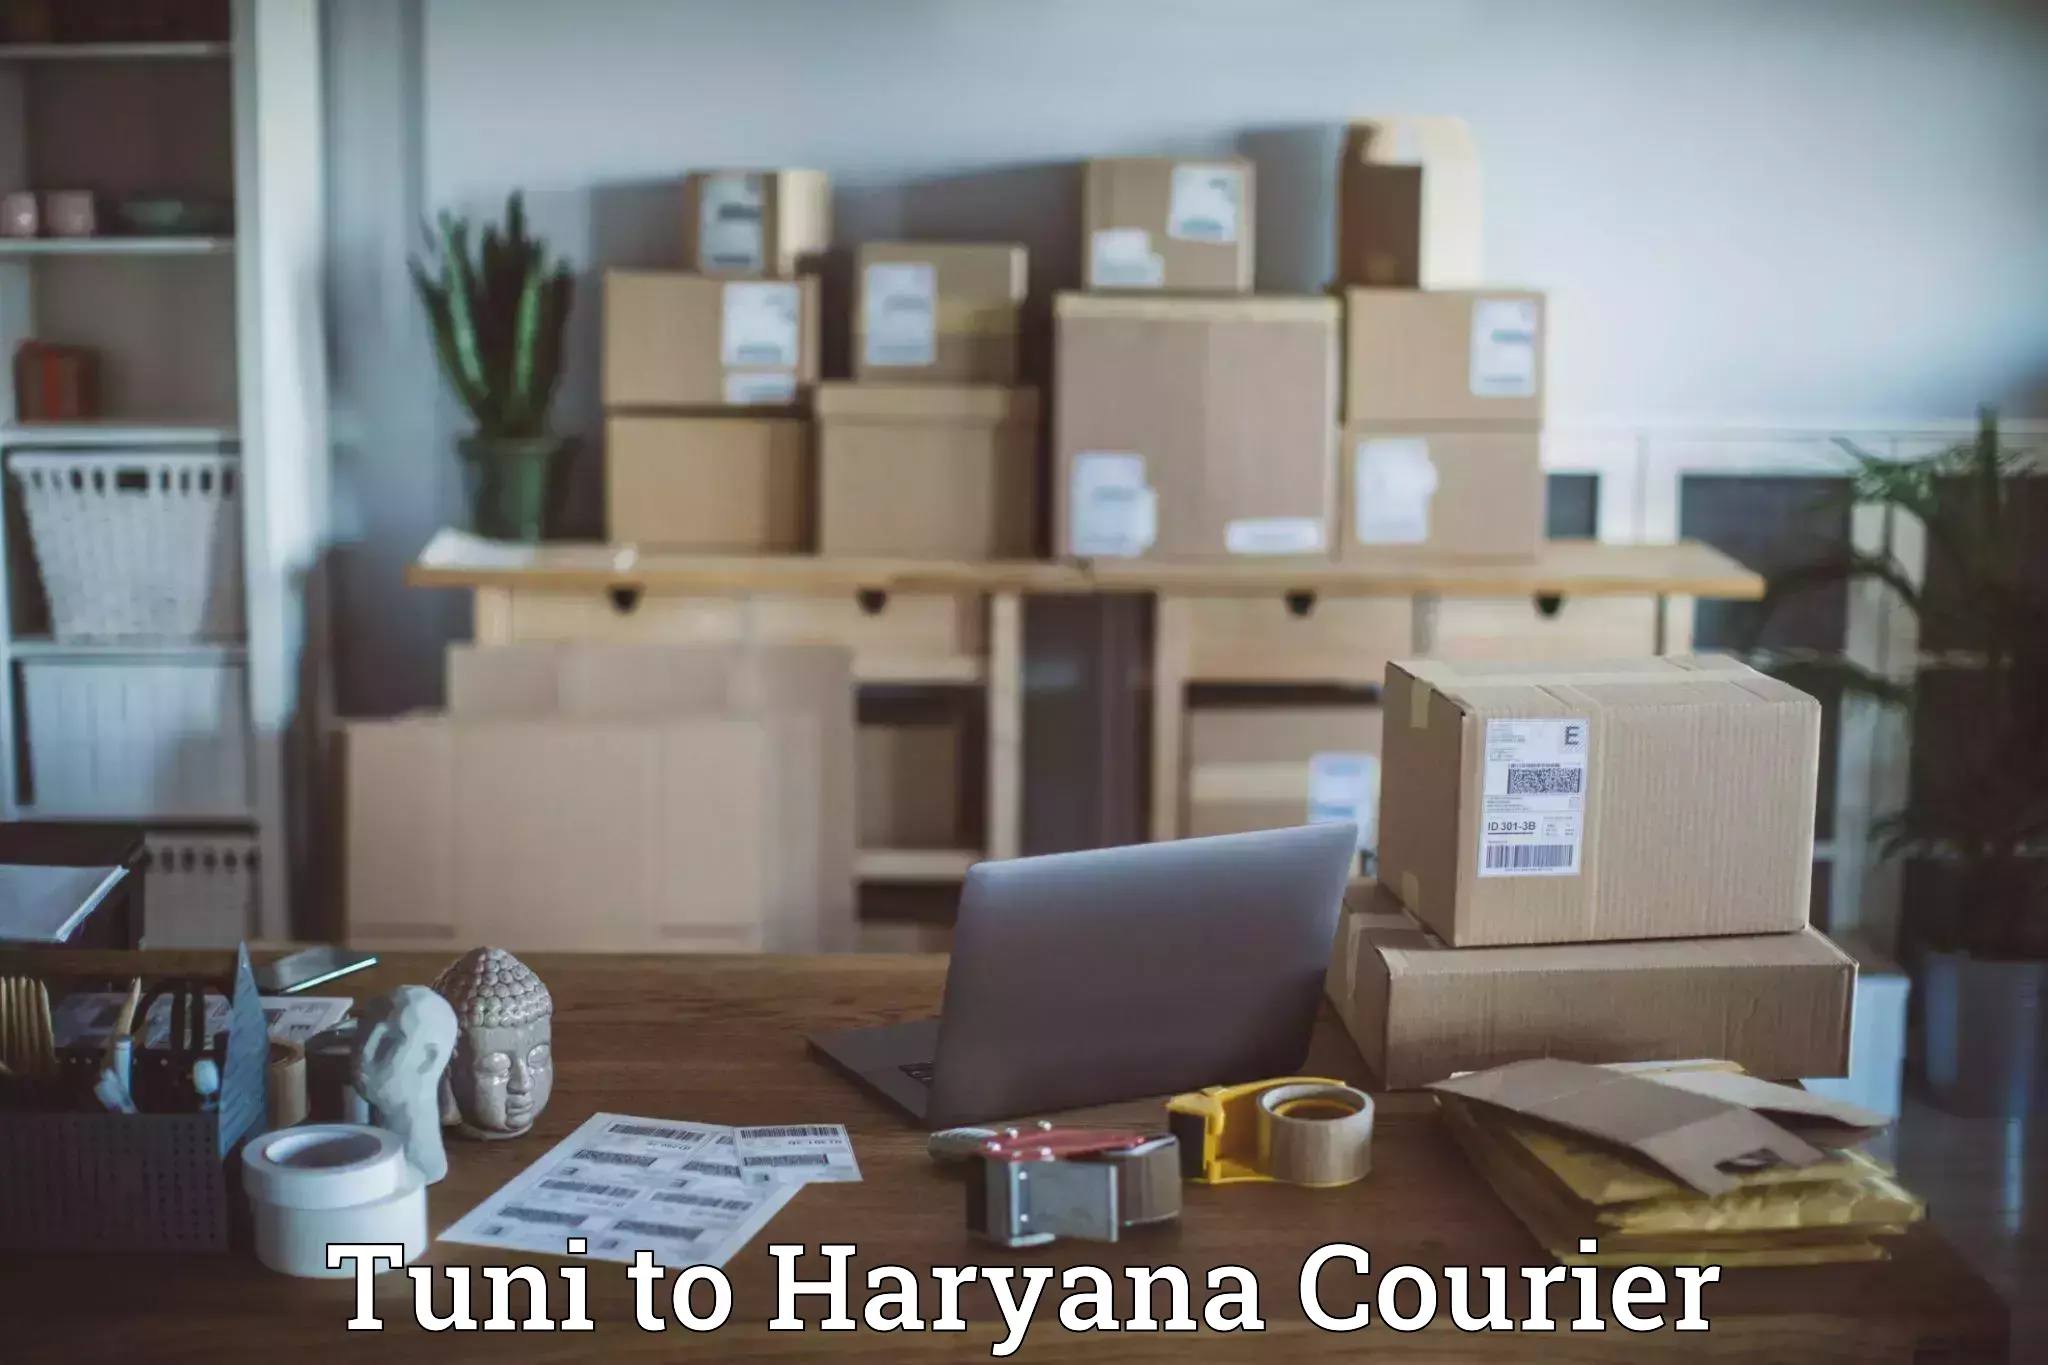 User-friendly delivery service Tuni to Haryana